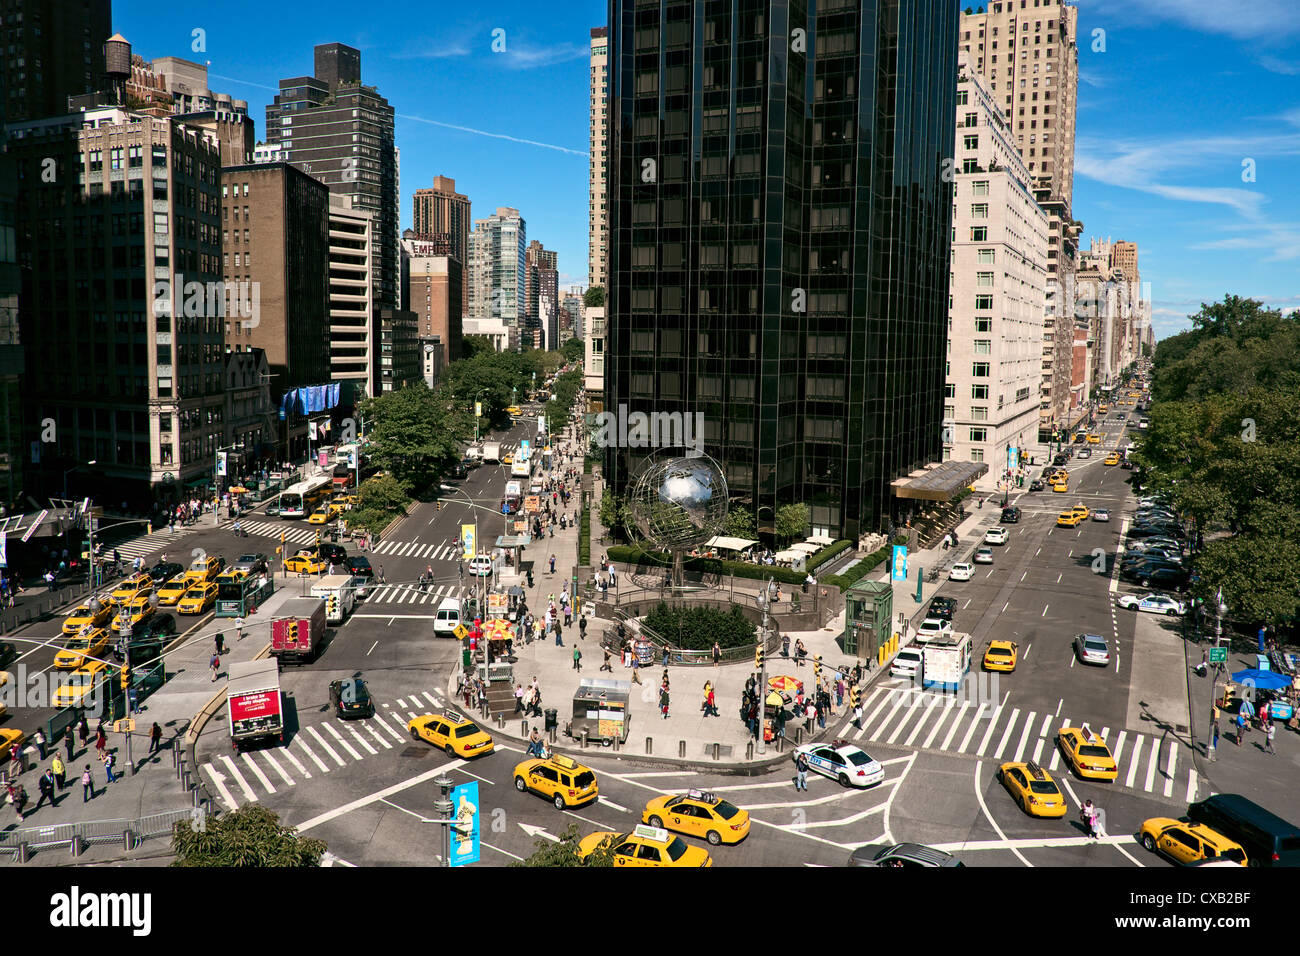 View of Broadway and Central Park West looking north from Columbus Circle, Stock Photo